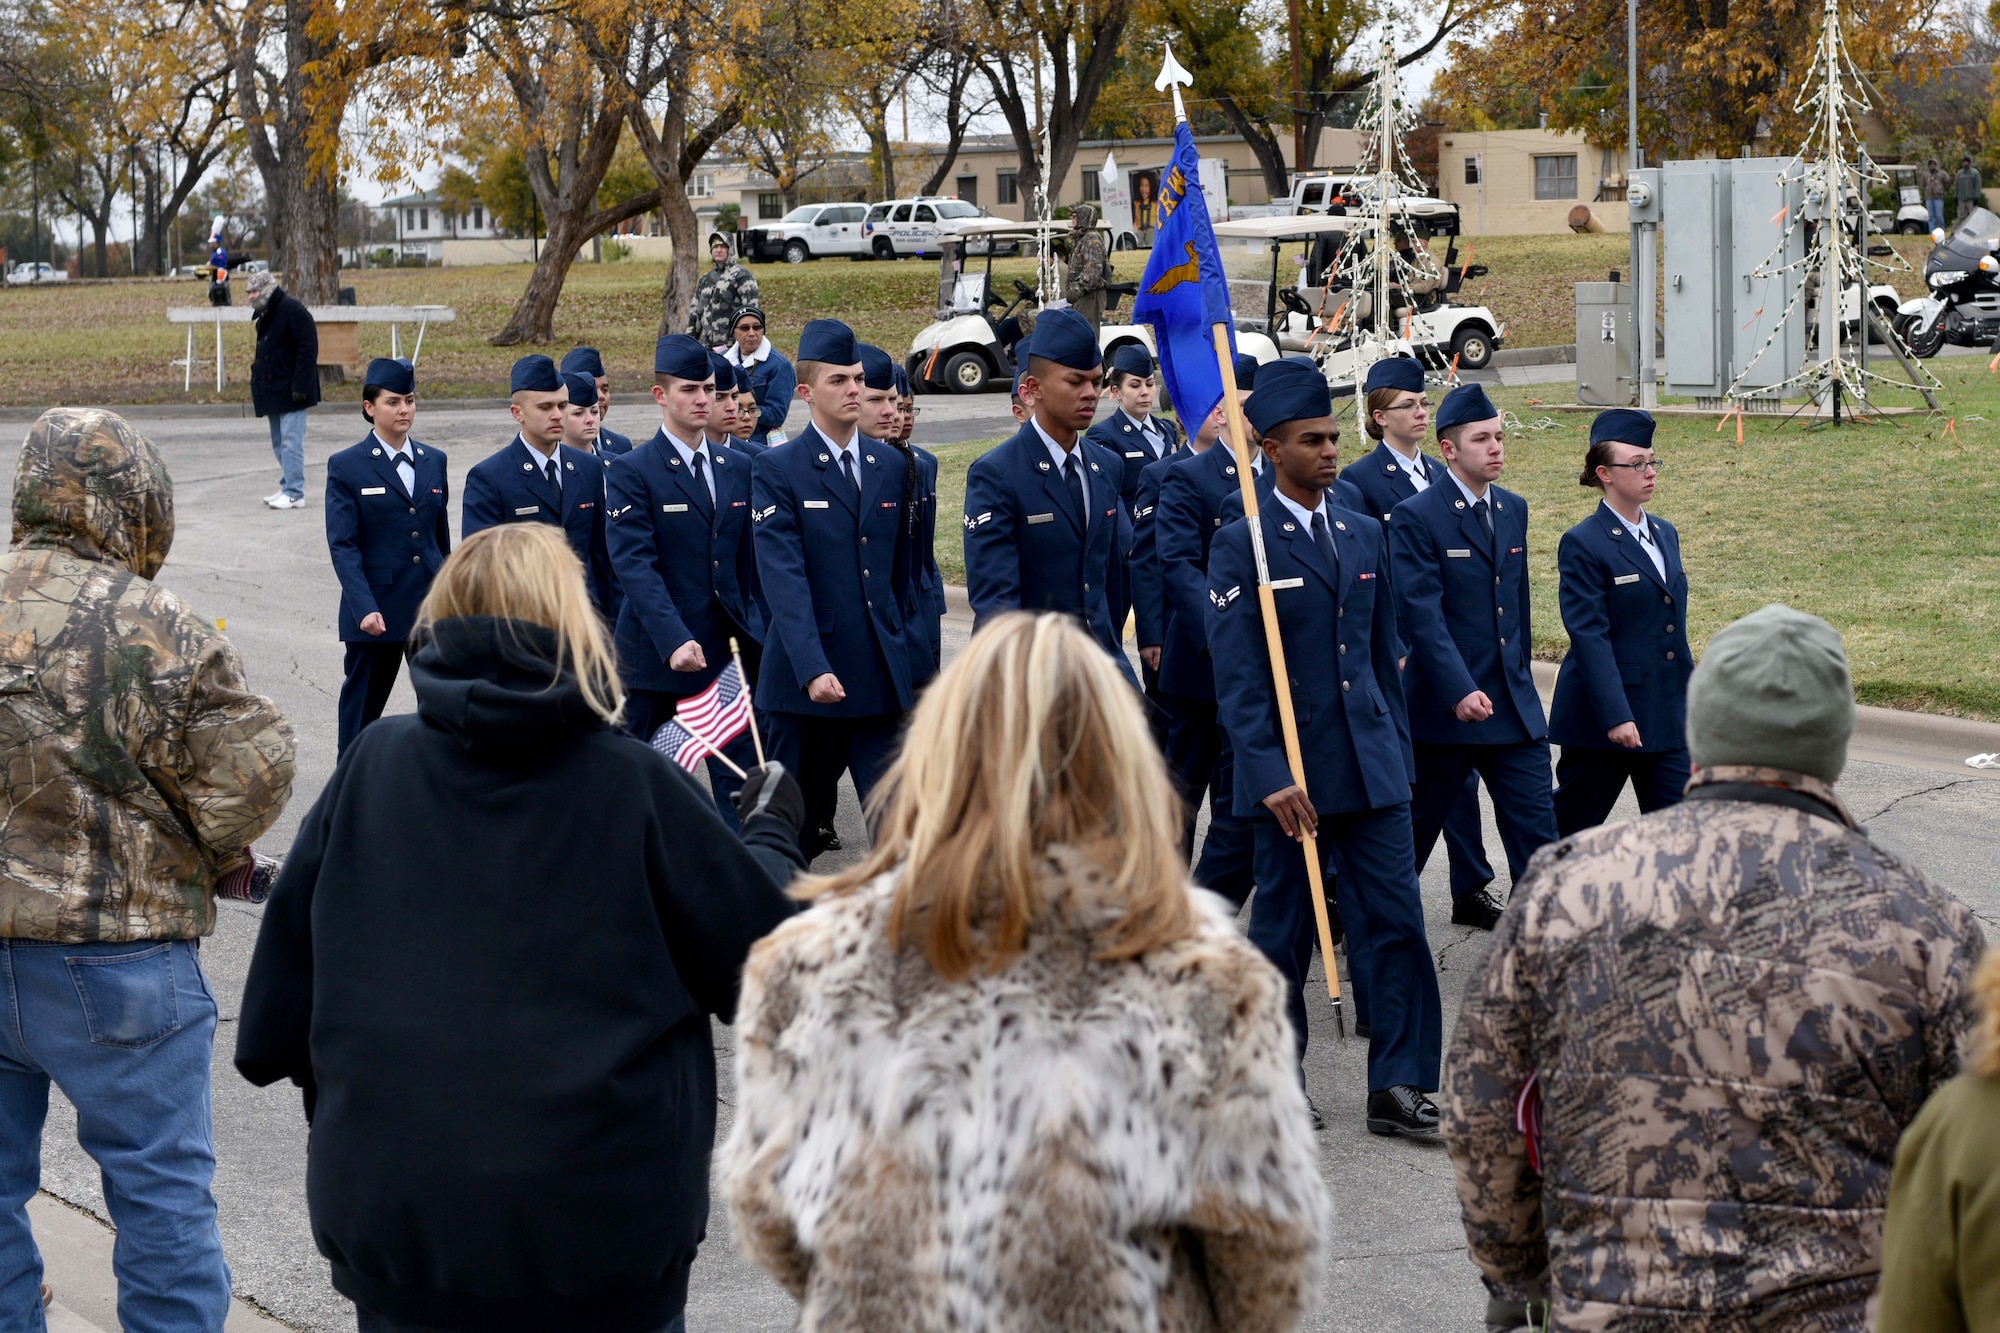 Airmen from the 17th Training Group march during the Heroes Hunt parade in San Angelo, Texas, Dec. 7, 2017. The mission of the 17th Training Group is to "Train, Develop and Inspire Professional Fire Protection and Intelligence, Surveillance and Reconnaissance Warriors."